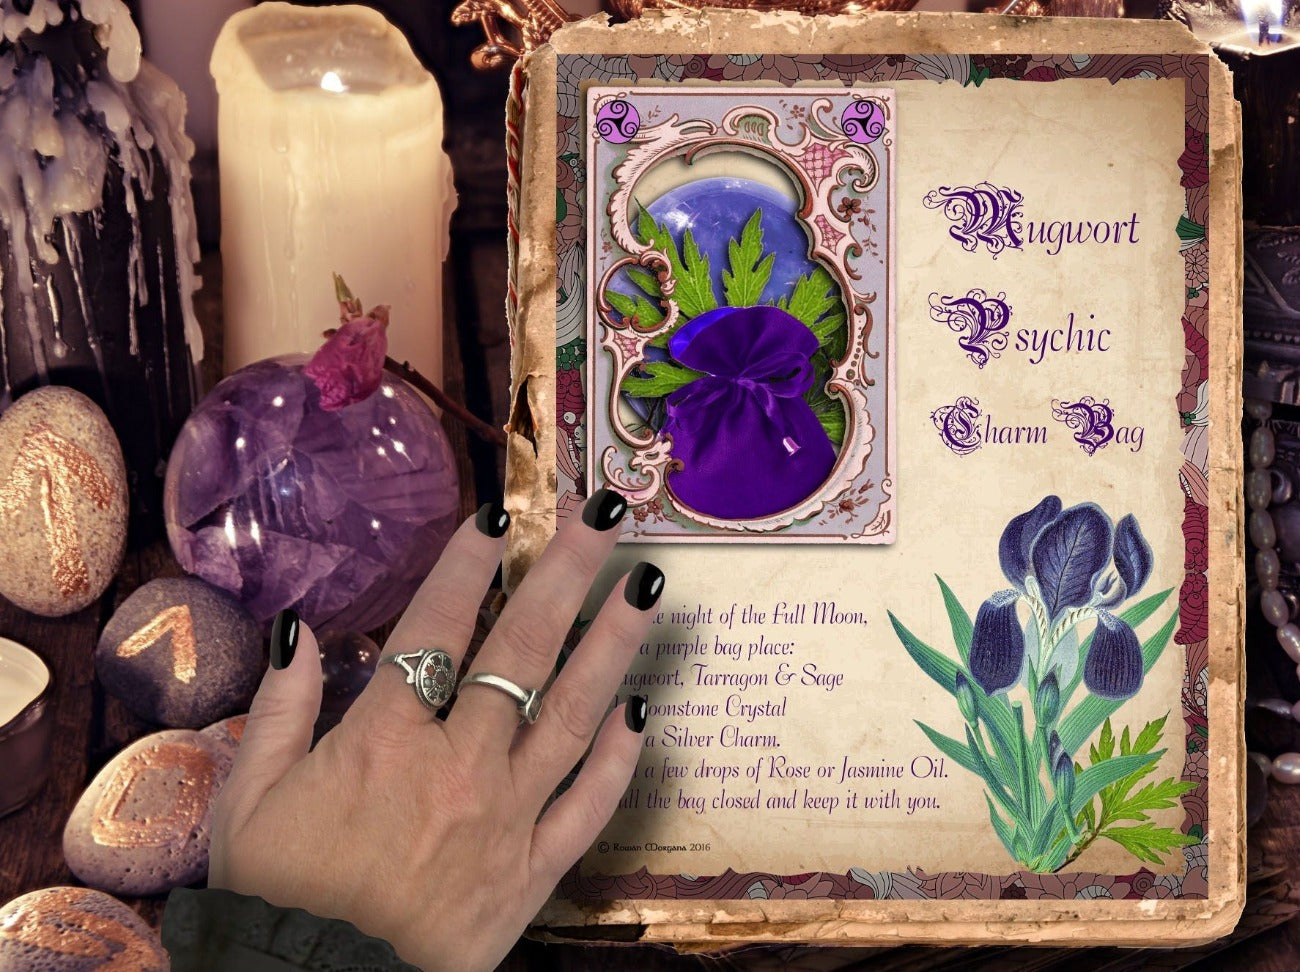 MUGWORT PSYCHIC Charm Bag, Recipe Spell, Apothecary Green Witchcraft Gift - Morgana Magick Spell